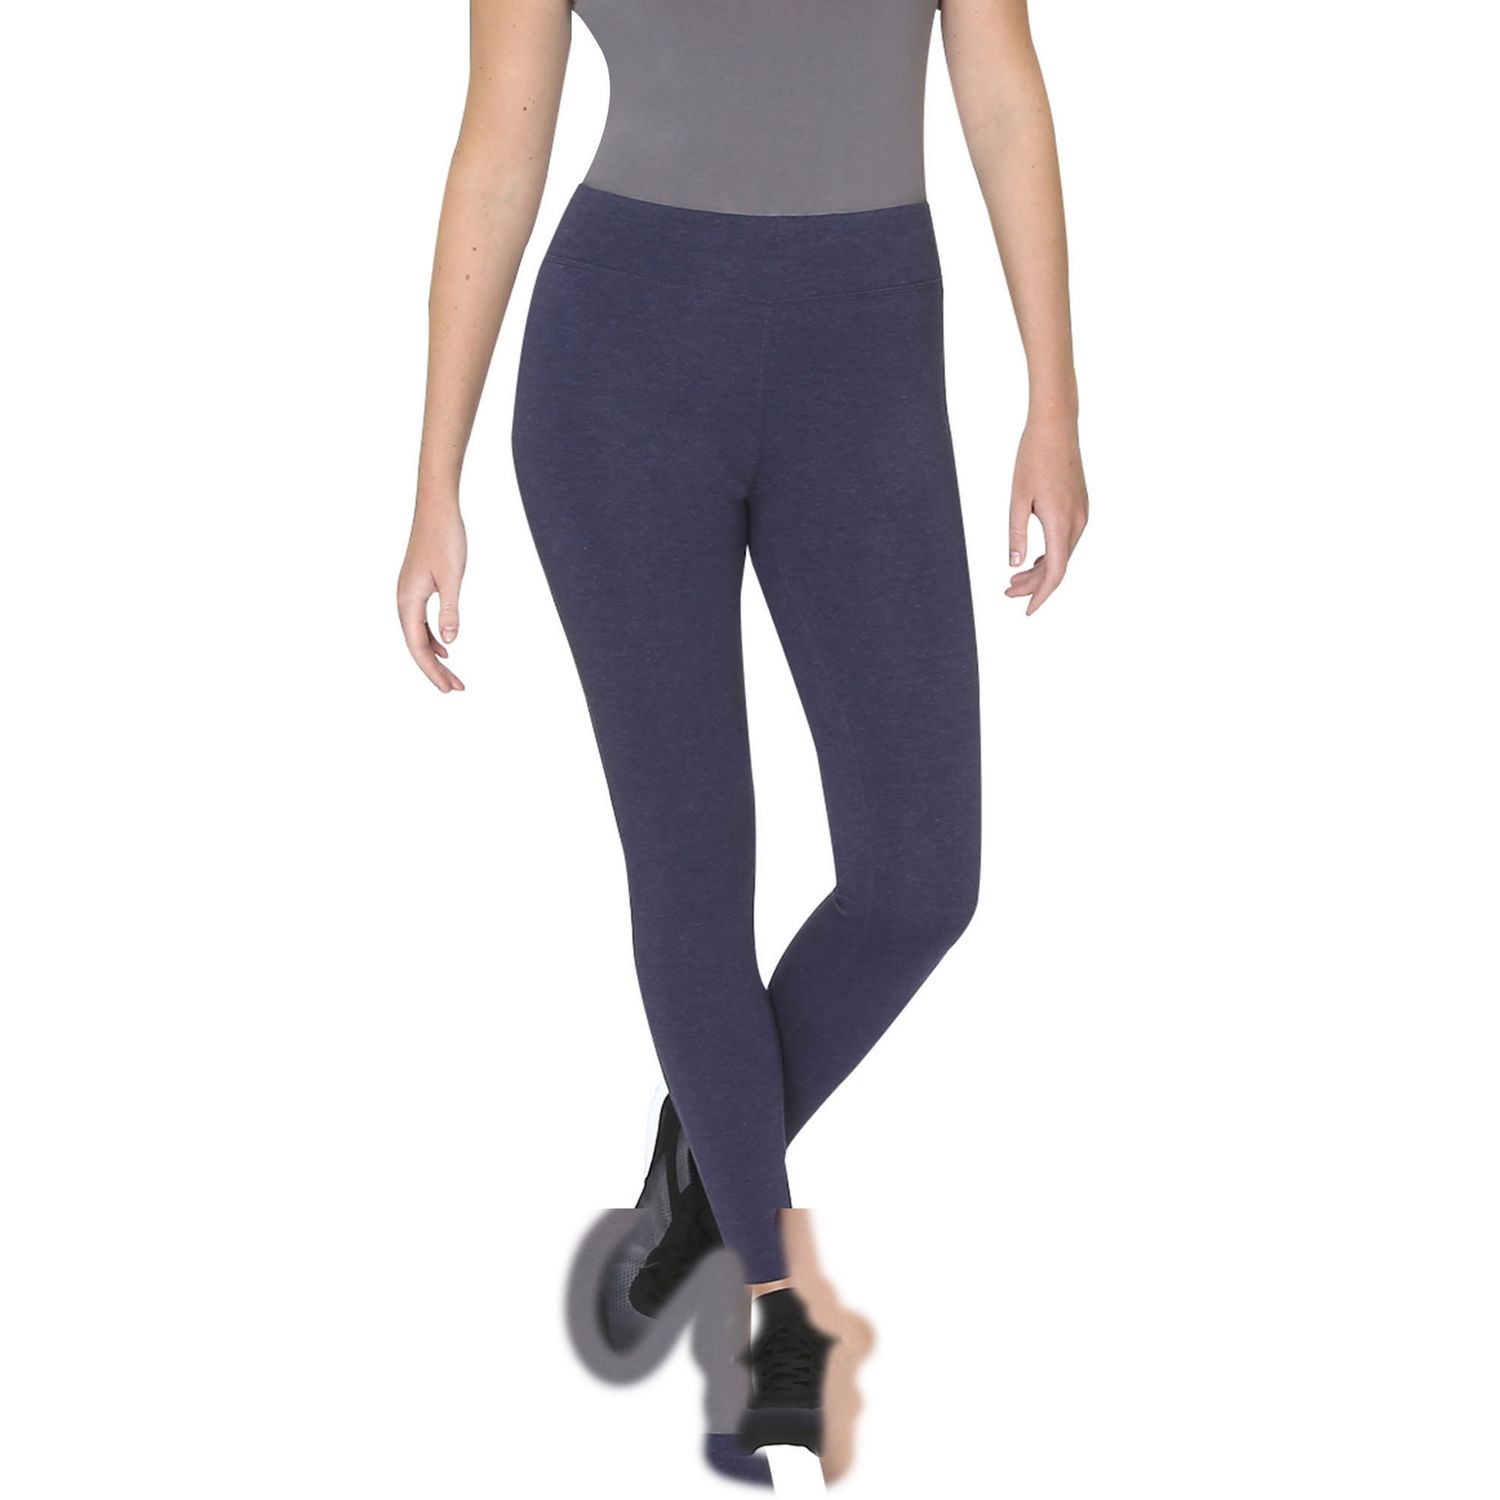 New WOT Never Worn. Athletic Works Women's Dri-Works Core Active Legging